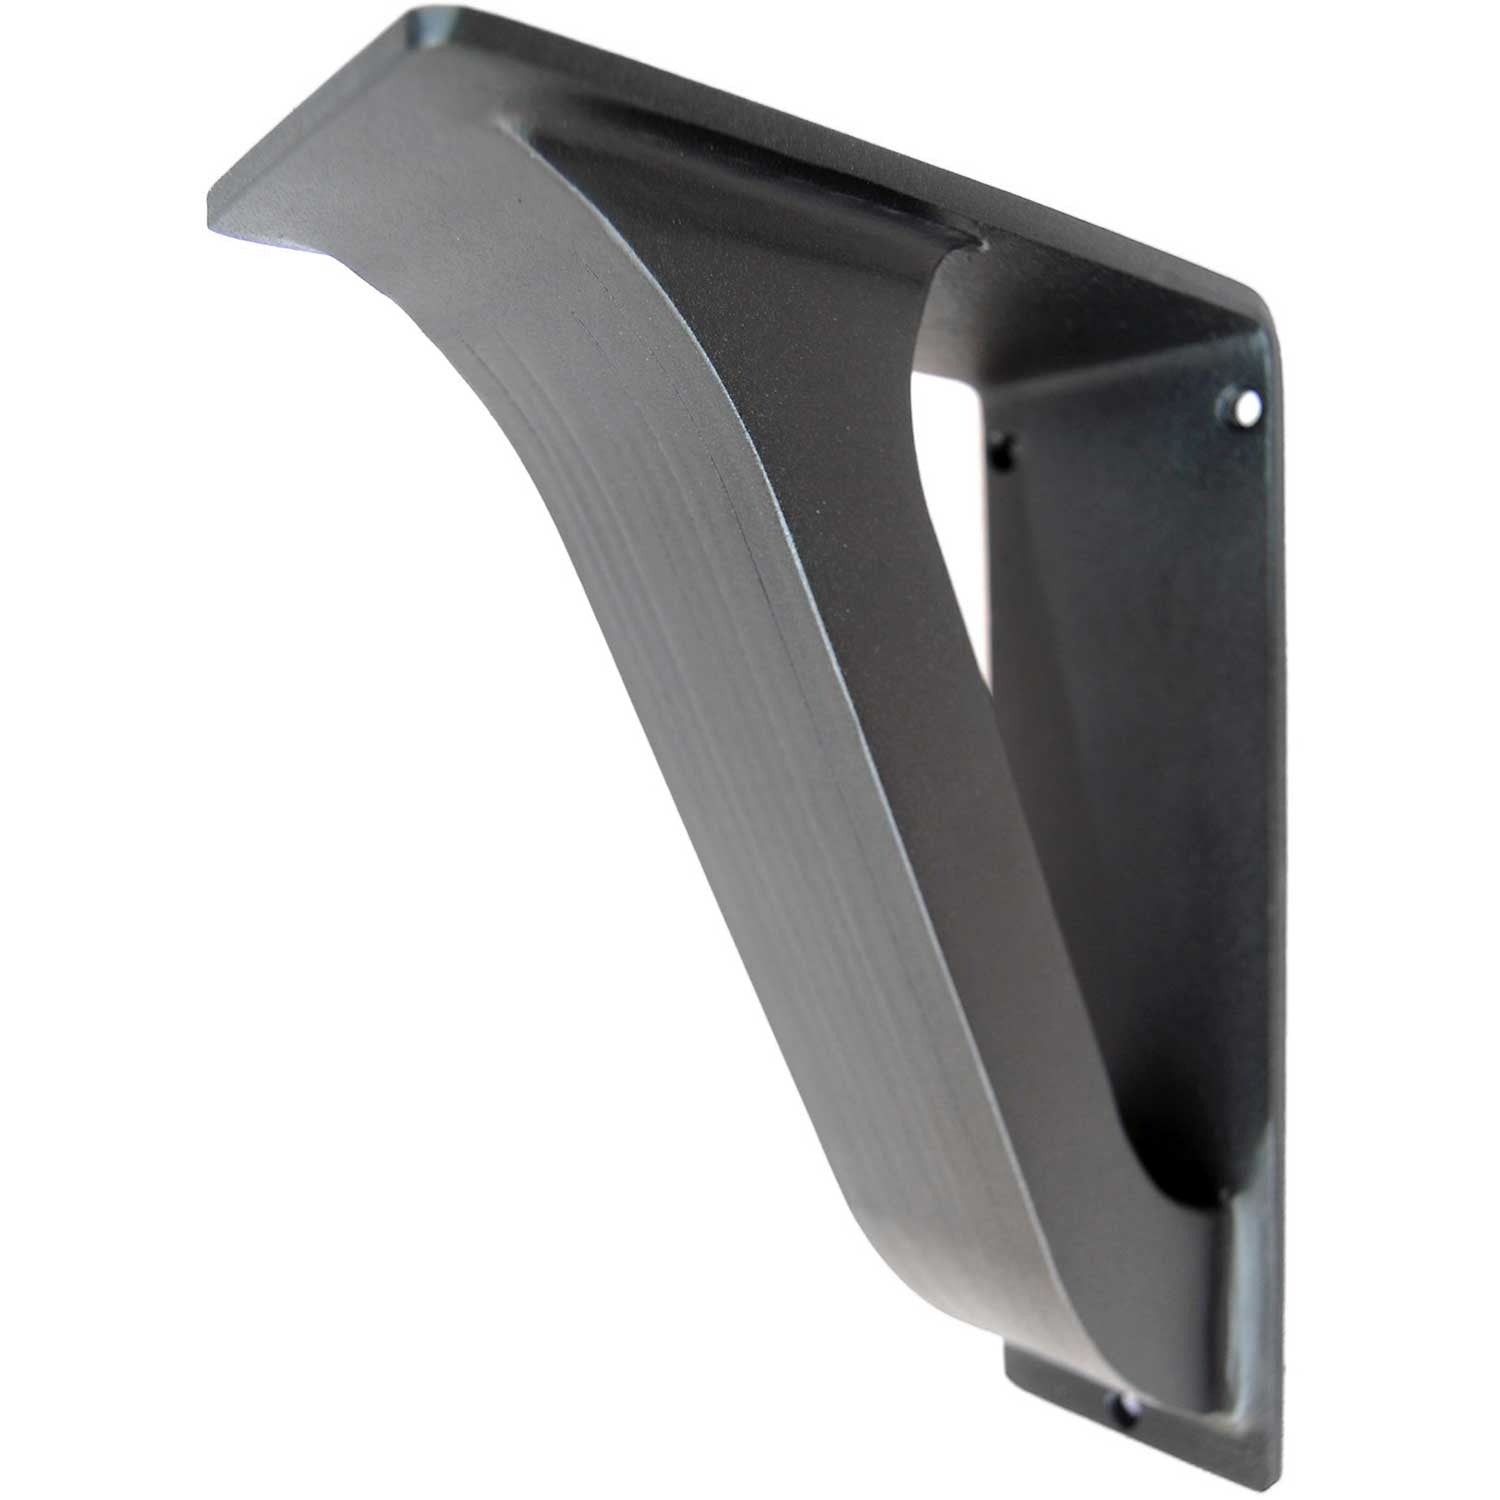 3inch wide Portland Iron Corbel with black iron finish, a countertop support bracket available in 2 bracket sizes